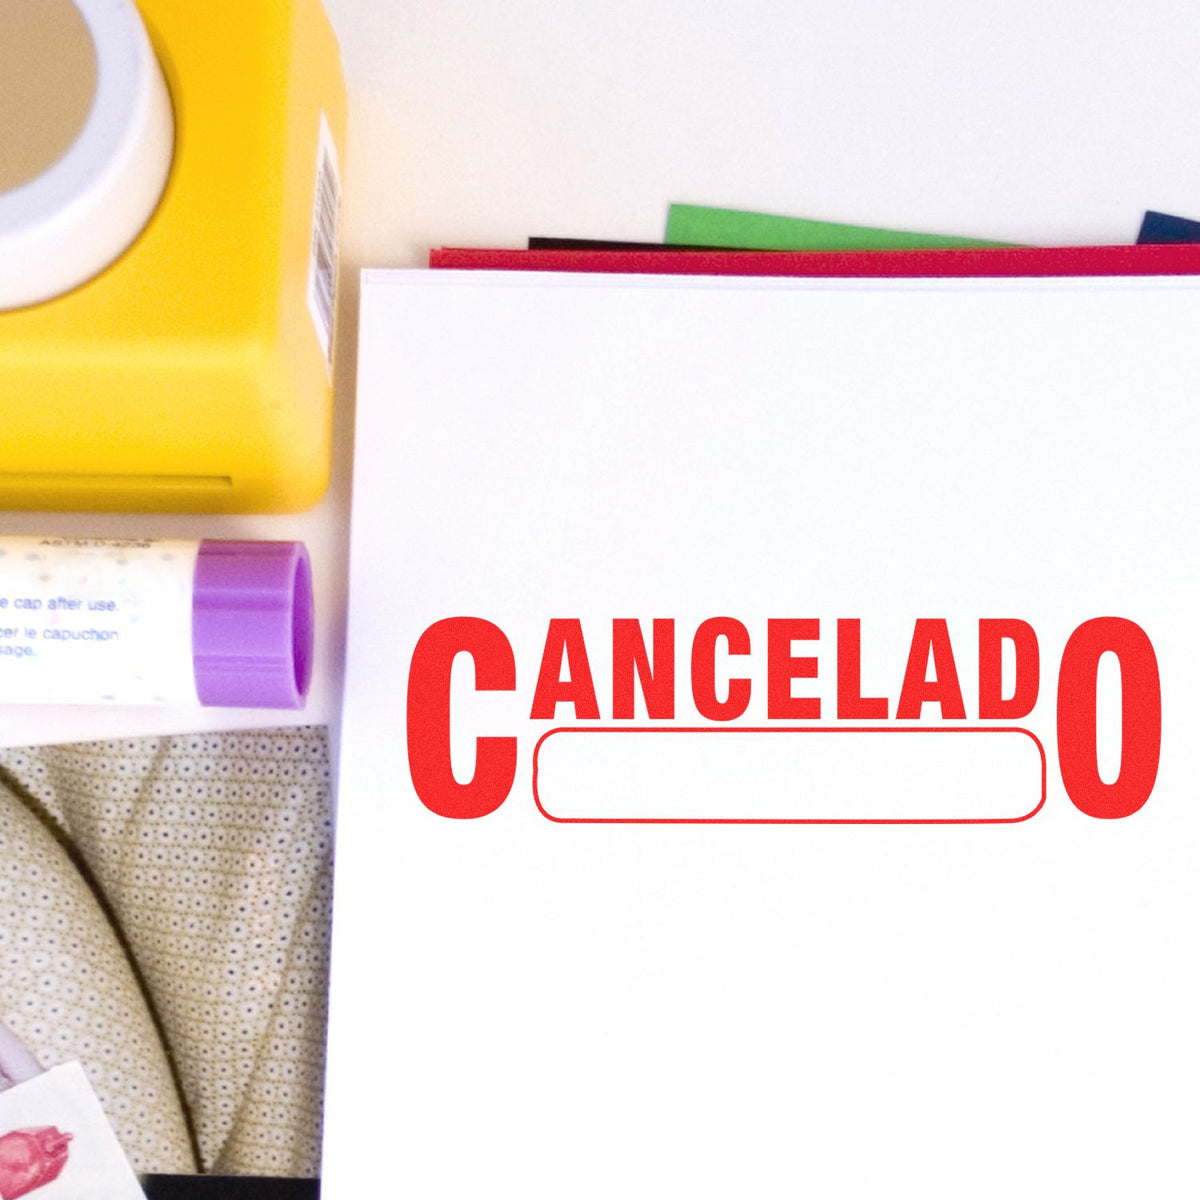 Cancelado with Box Rubber Stamp In Use Photo